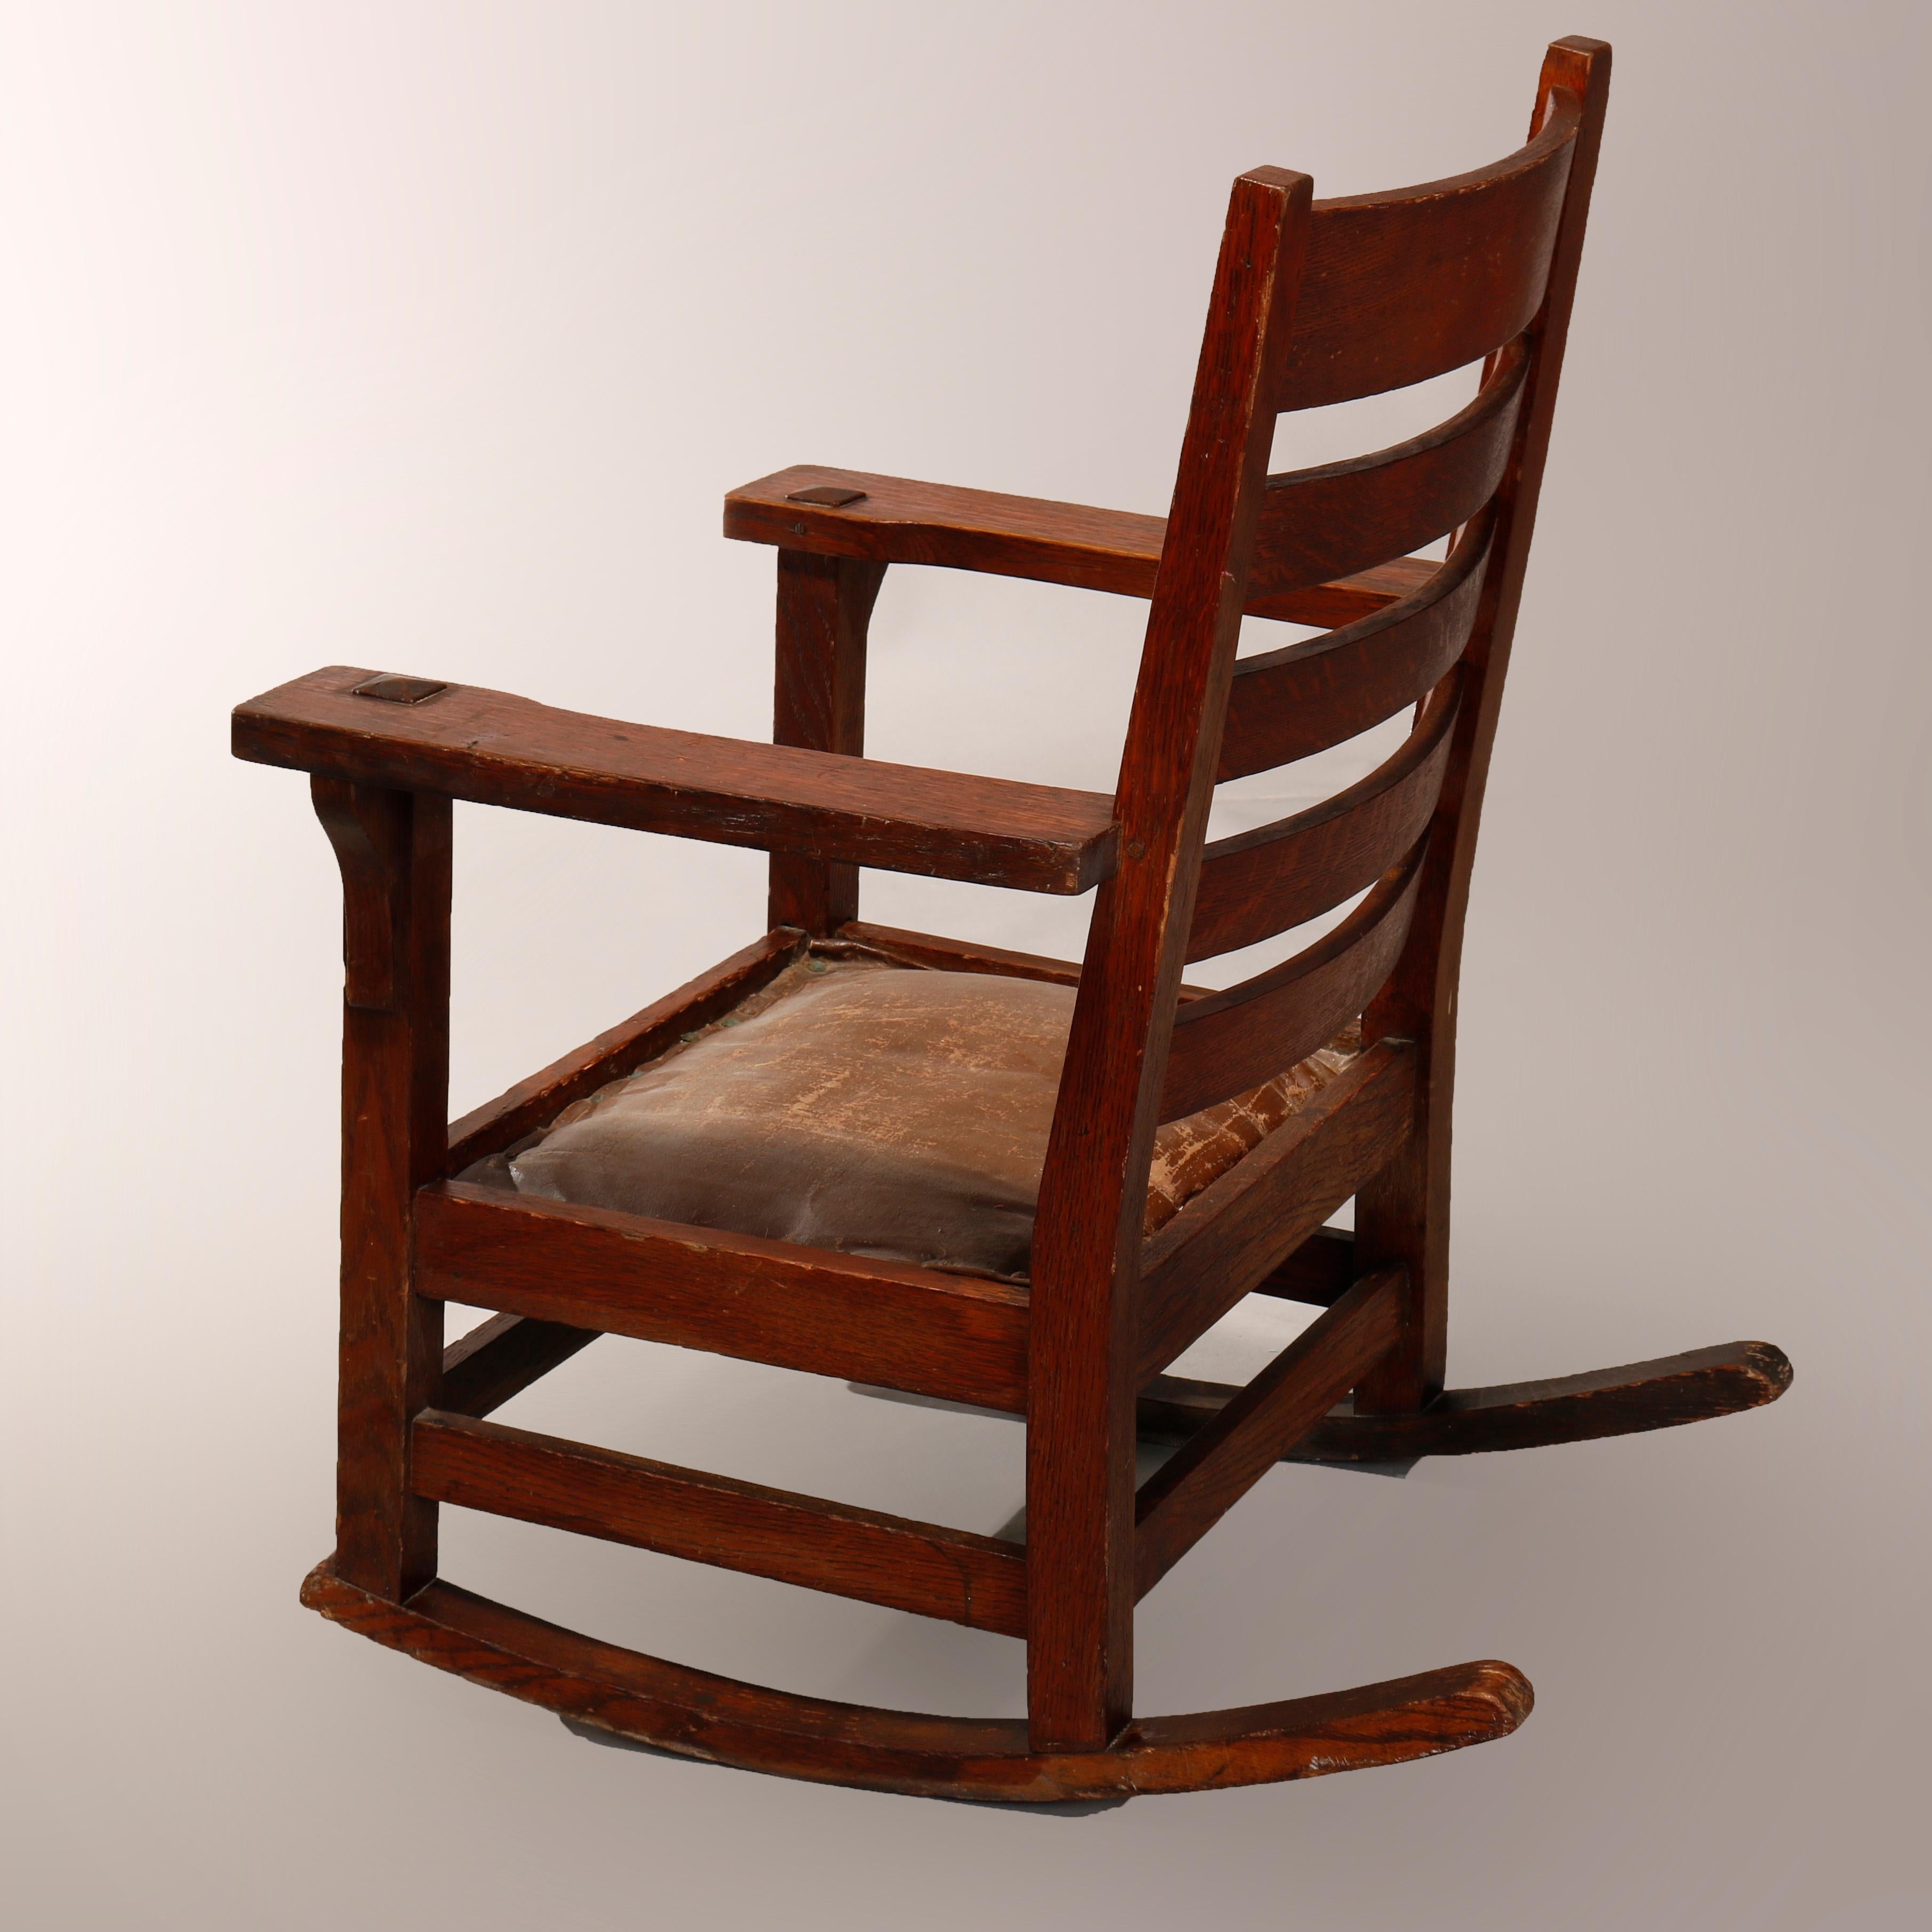 An antique Arts & Crafts Mission rocker in the manner of Gustav Stickley offers oak construction with slat back, circa 1910.

Measures: 35